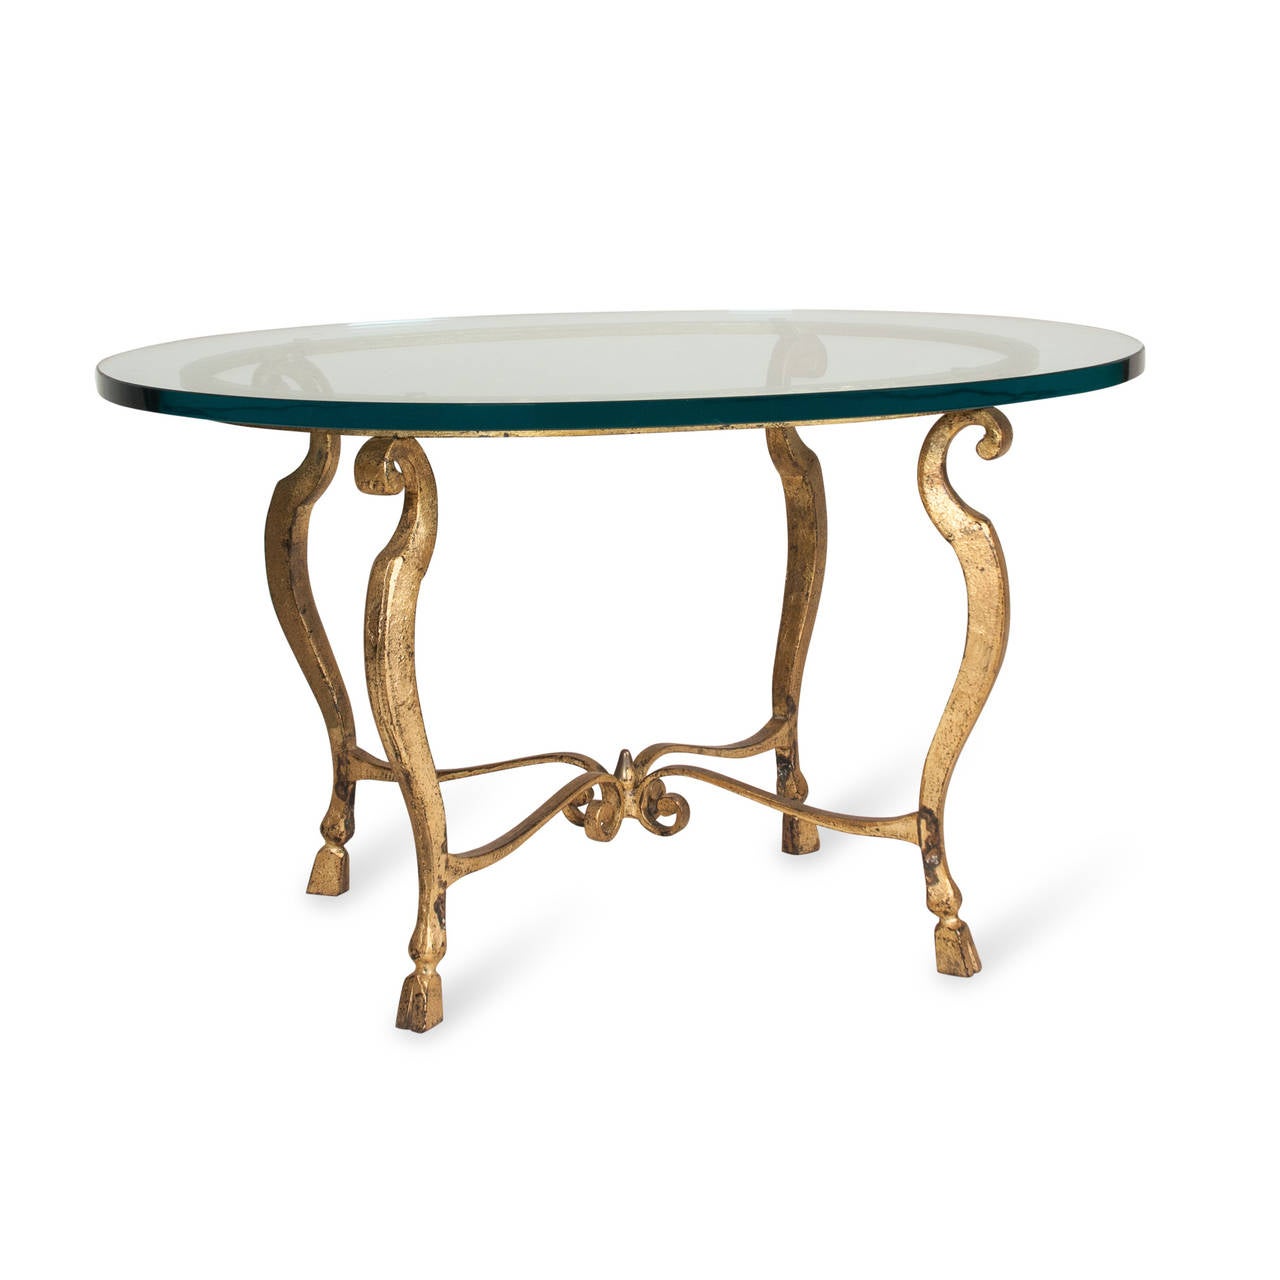 Gilt iron cocktail table, with oval starfire glass top, arced legs ending in hoof feet, center cross stretcher with ribbon center, French, 1960s. Width 30 in, depth 18 in, height 24 in.